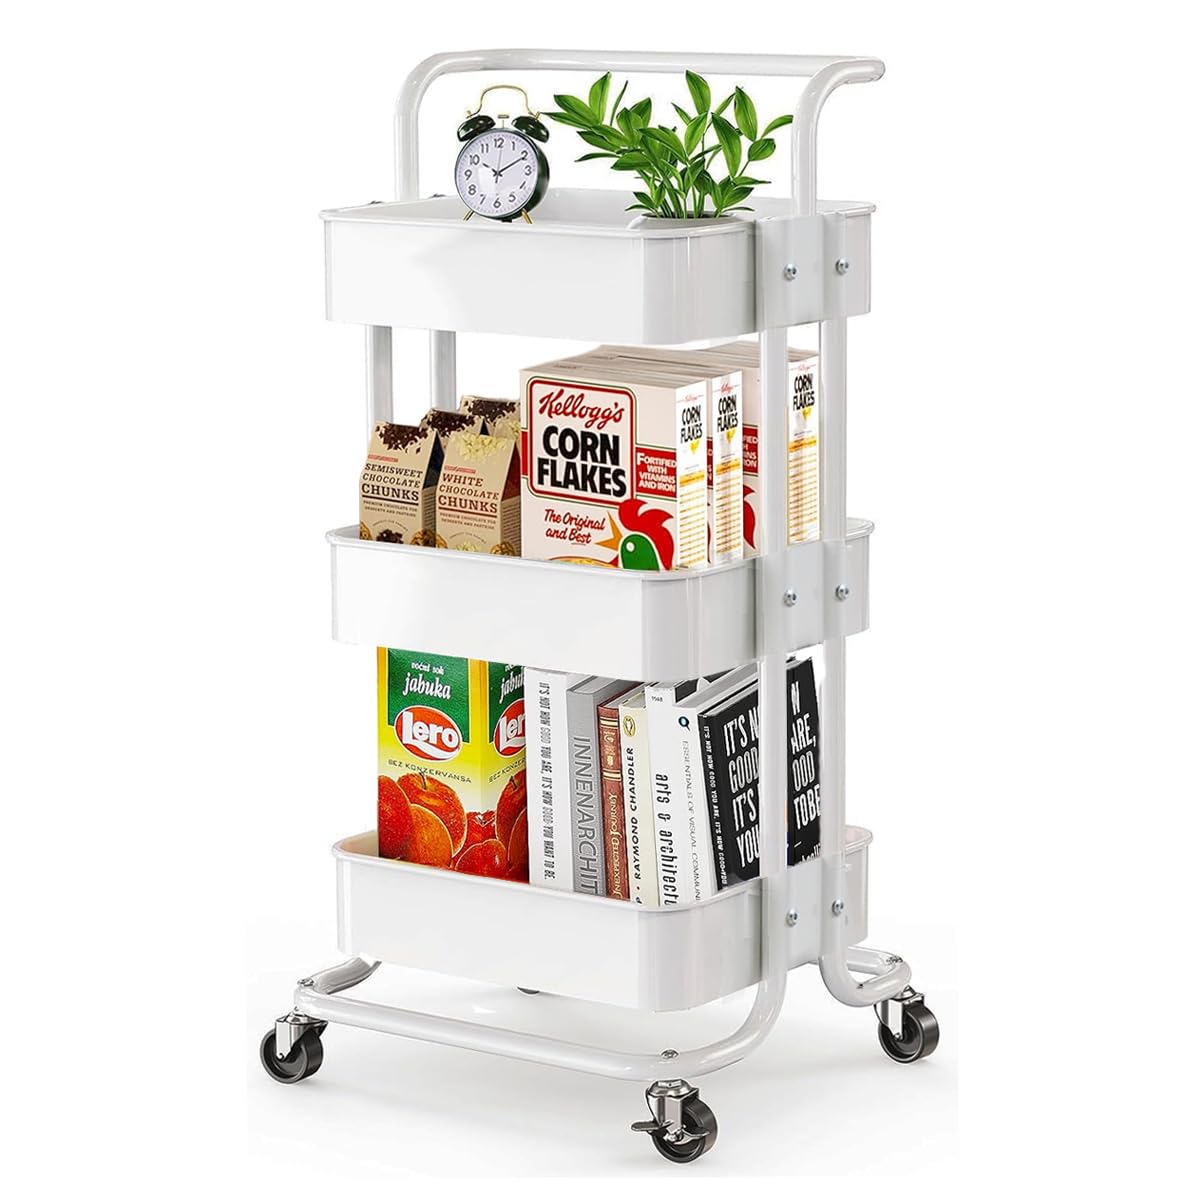 YKL 3-Tier Utility Rolling Cart,Mobile Utility Cart with Lockable Caster Wheels, Metal Organization Cart with Handle Multifunctional Storage Shelves for Kitchen Living Room Office White